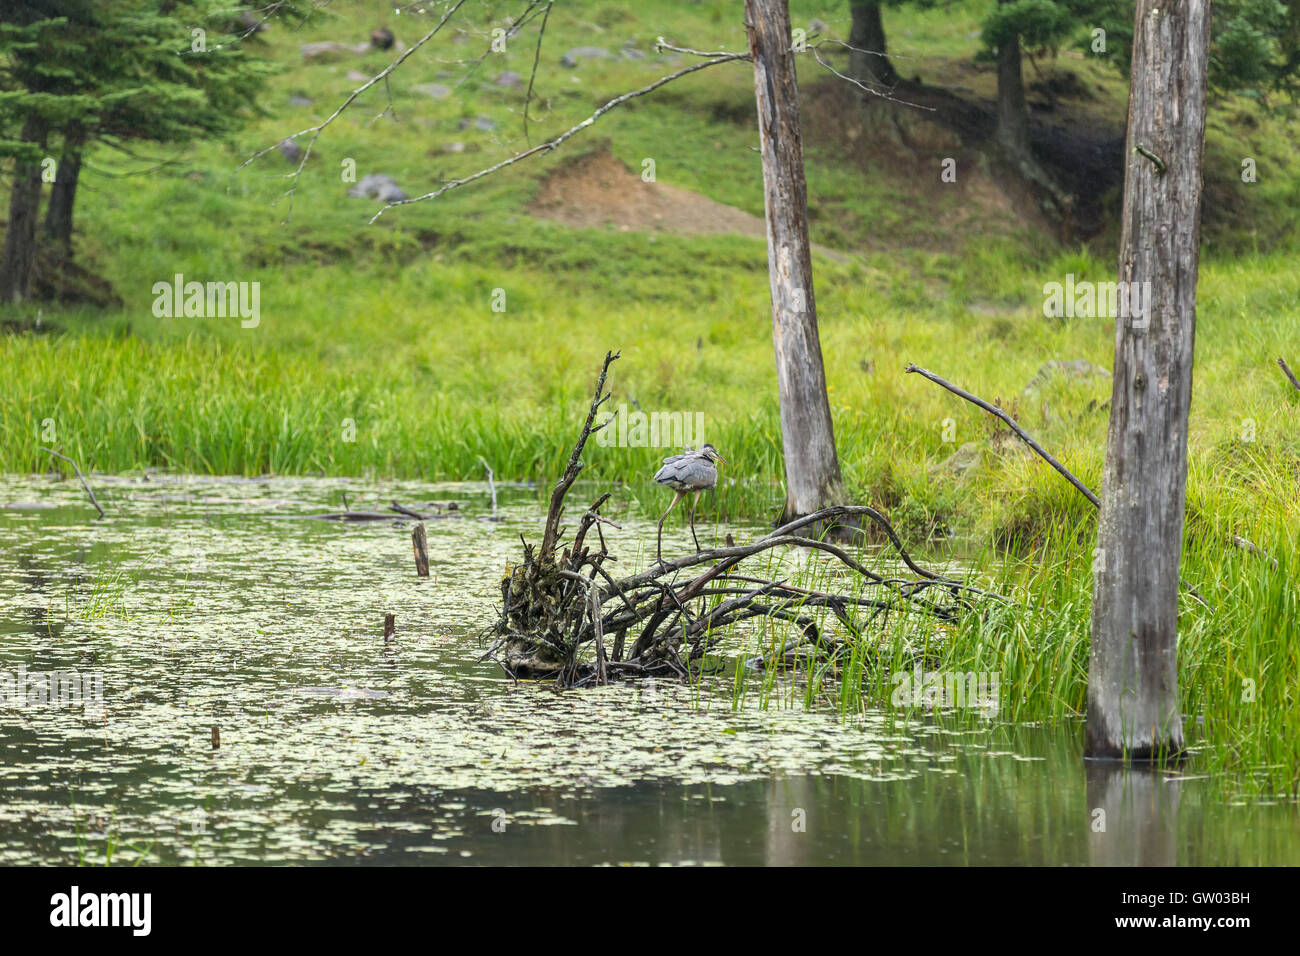 Great Blue Heron in its natural setting in nature Stock Photo